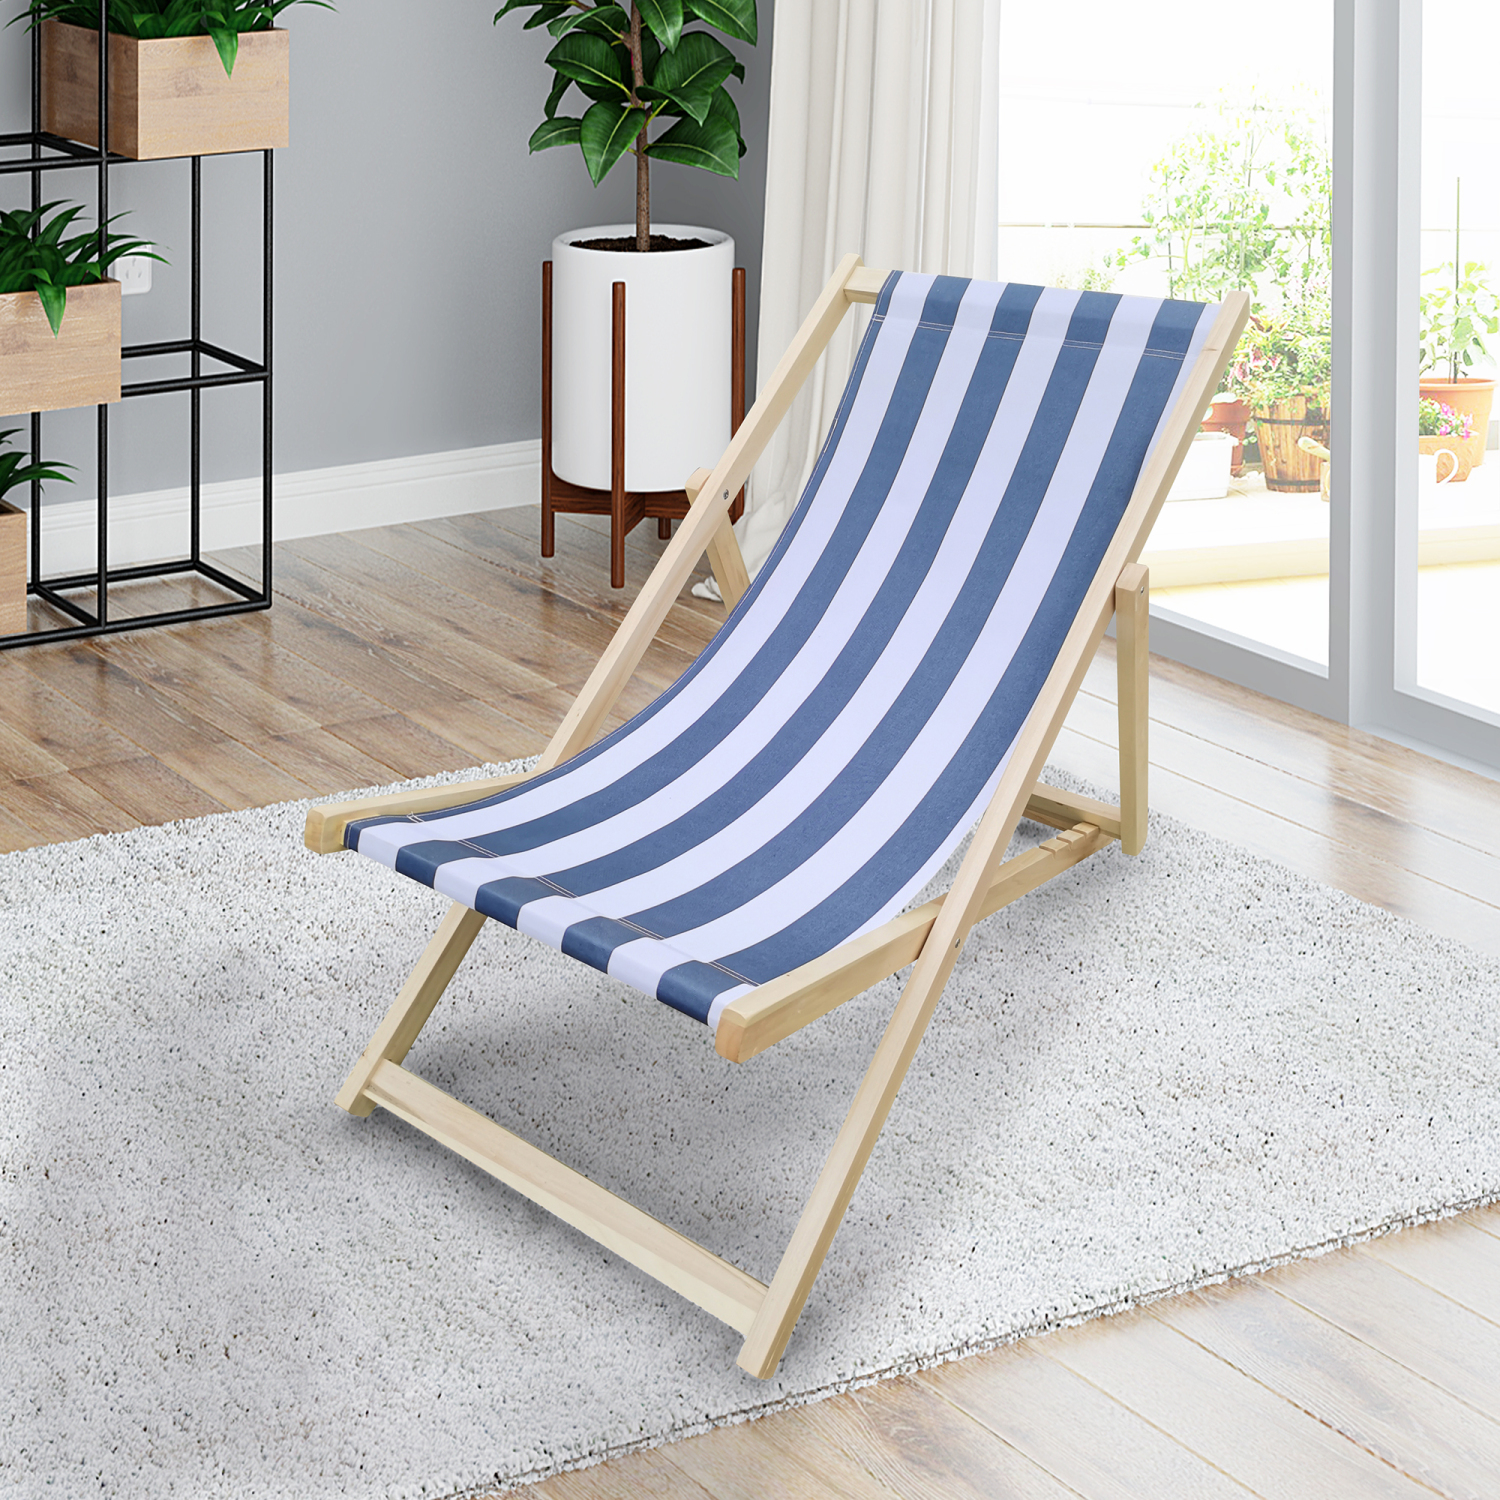 SUGIFT Wood Beach Sling Chair, Wood Beach Chair,Wooden Folding Adjustable Patio Chair for Picnic,Patio and Outdoors,Dark blue - image 3 of 9